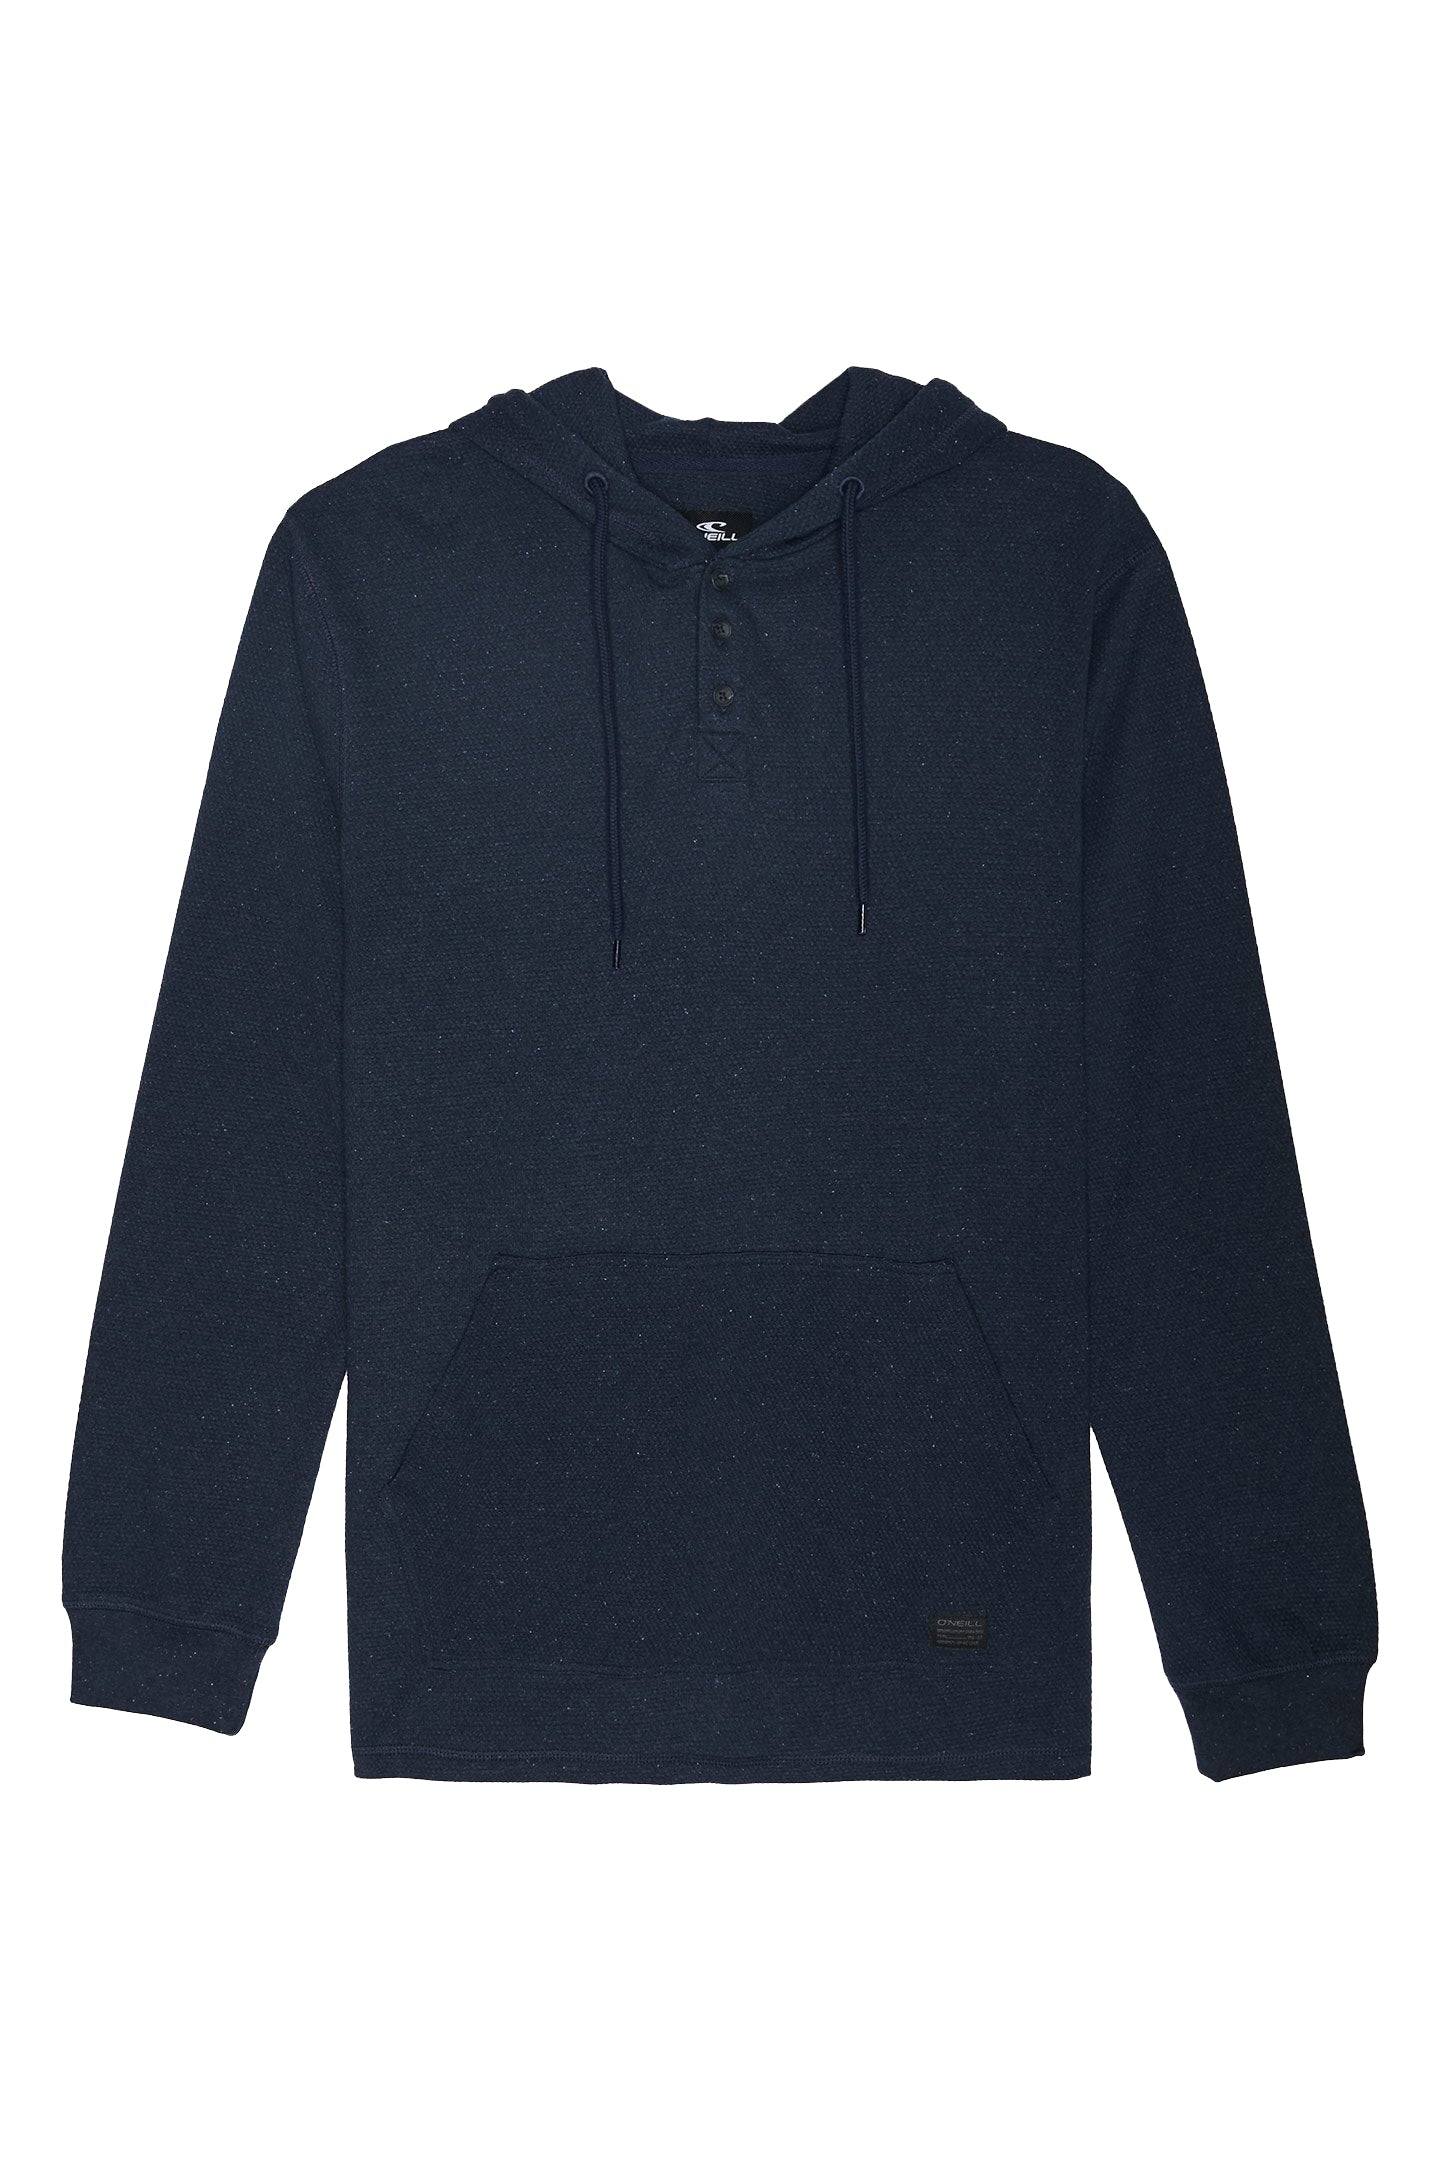 O'neill Apollo Pullover Hoodie NVY-Navy XL